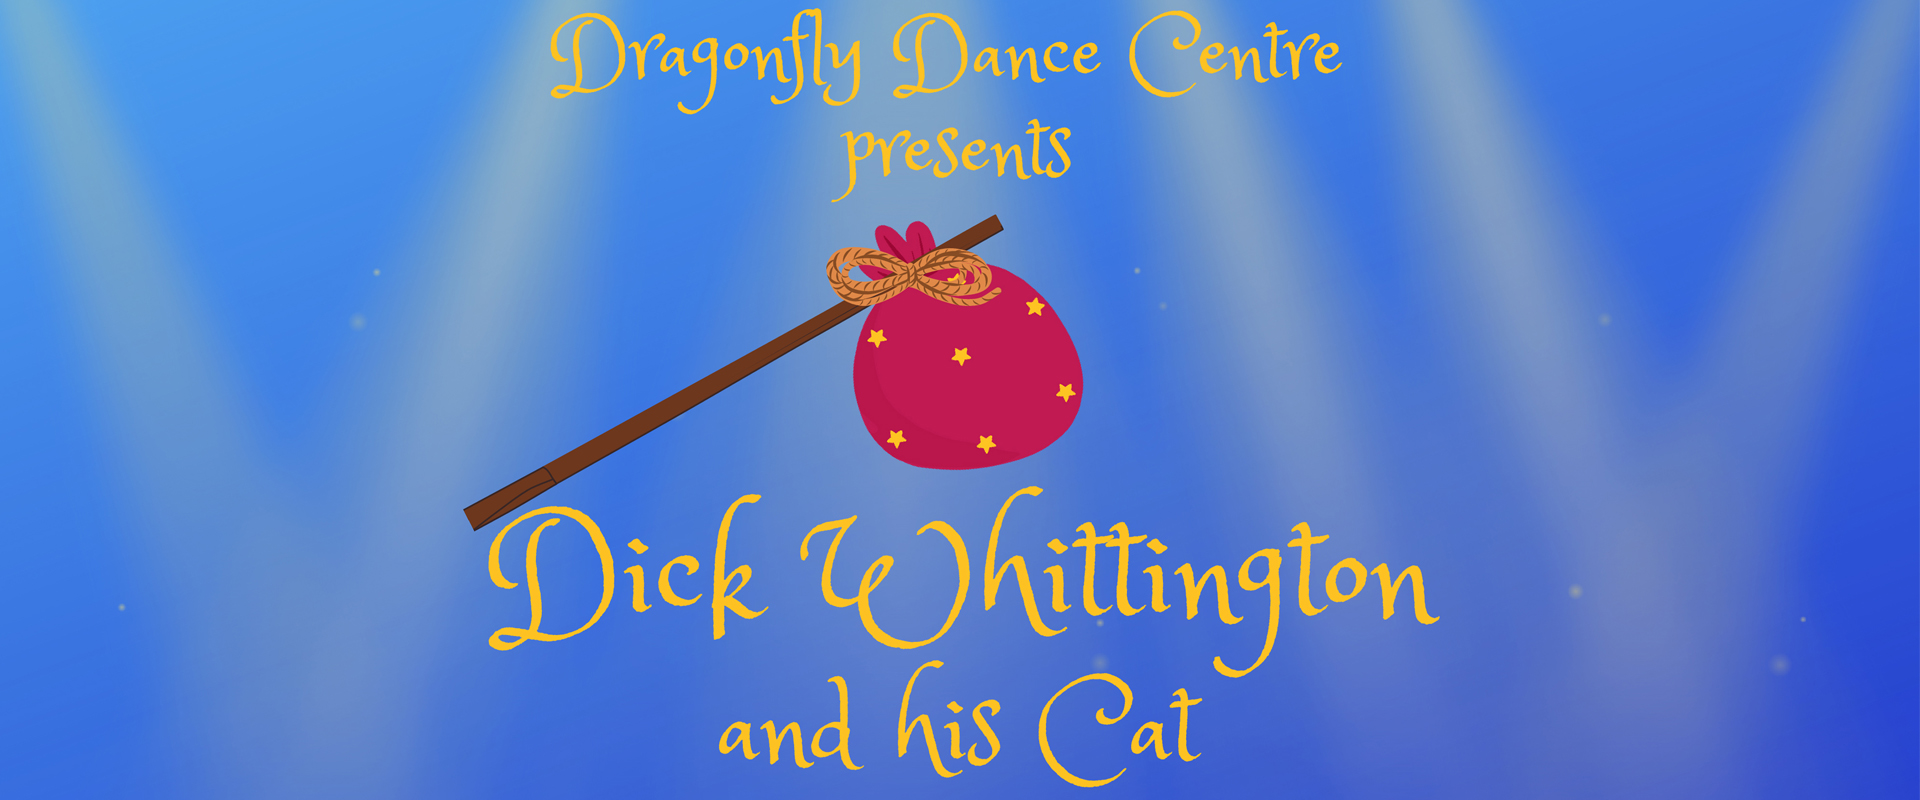 Dragonfly Dance:Dick Whittington and his Cat